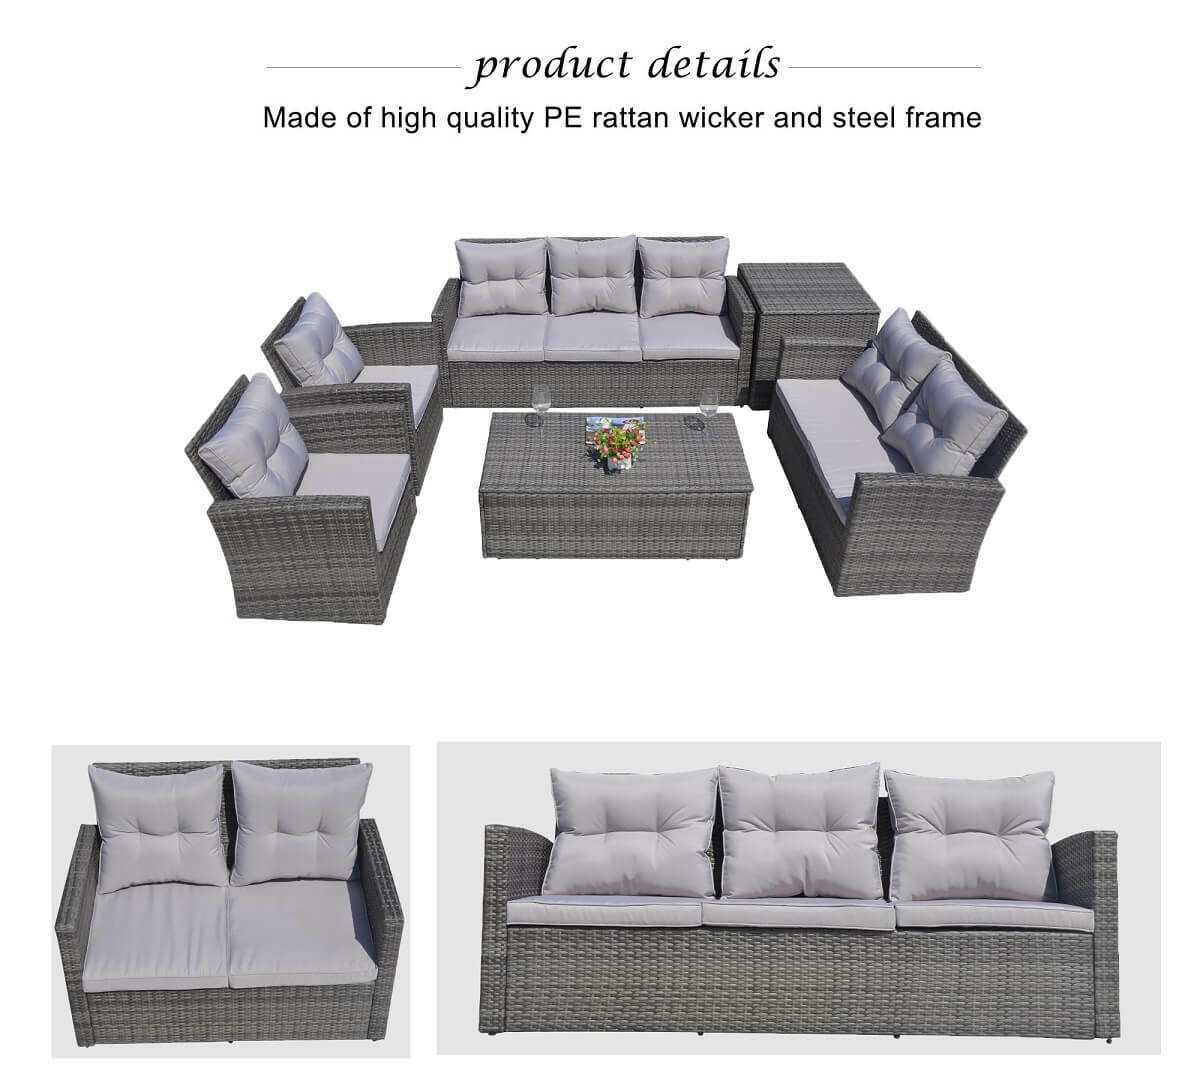 Abrihome Medford 6 Piece Sectional Set with Cushions